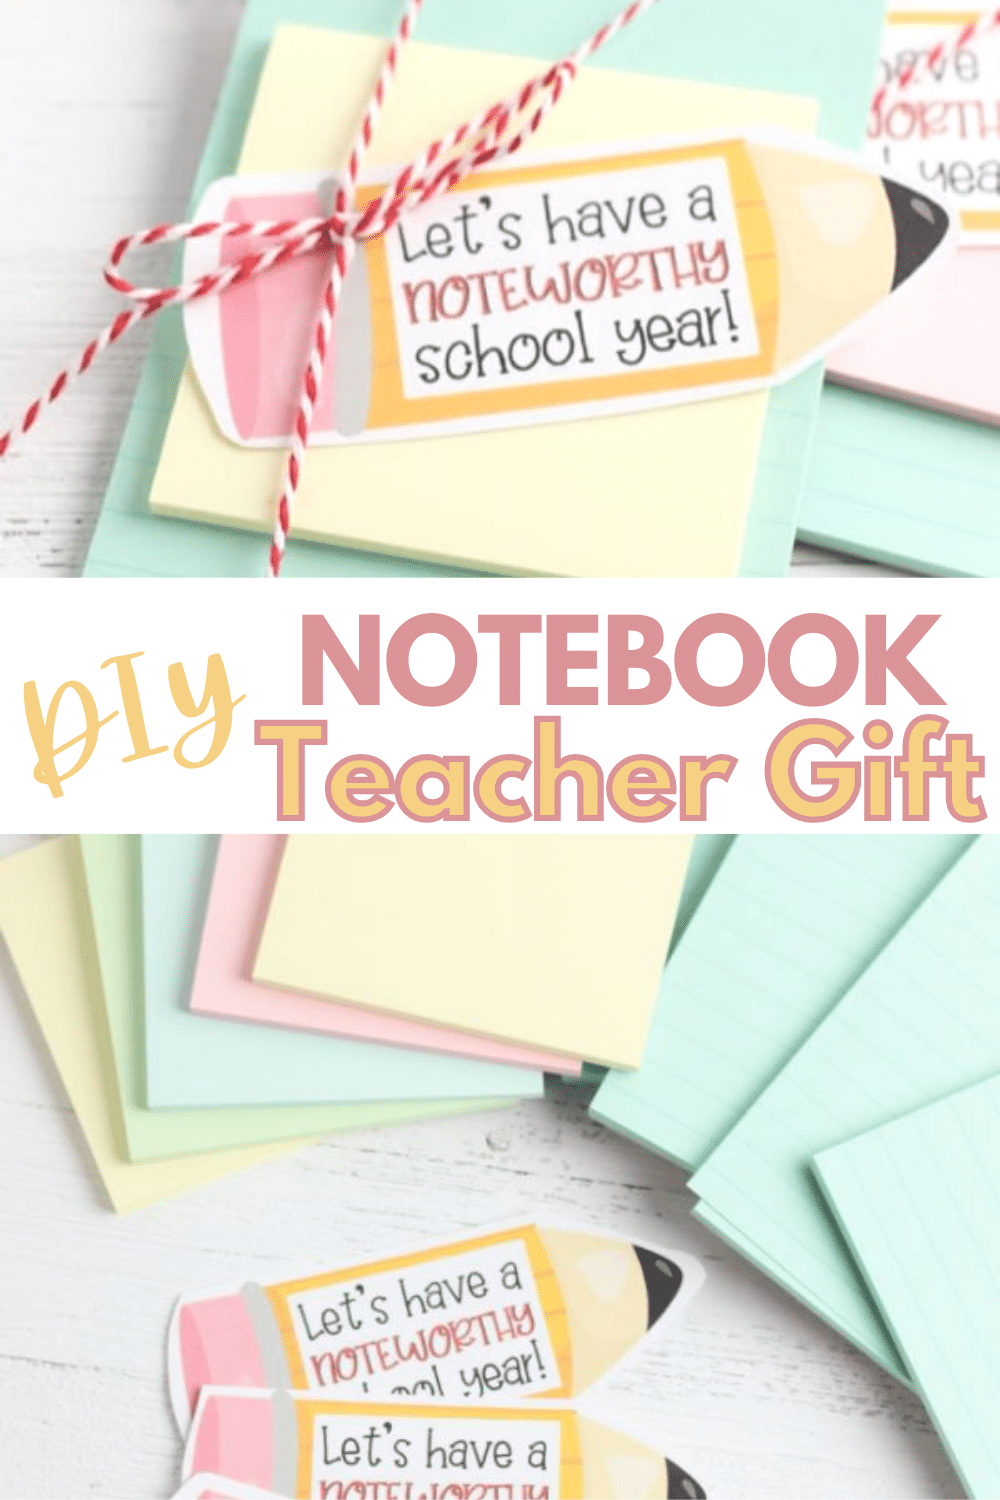 top image is a Notebook Teacher Gift tied together with red and white twine, bottom image is a stack of sticky notes , notepads and papers shaped like pencils with text reading Let's have a noteworthy school year